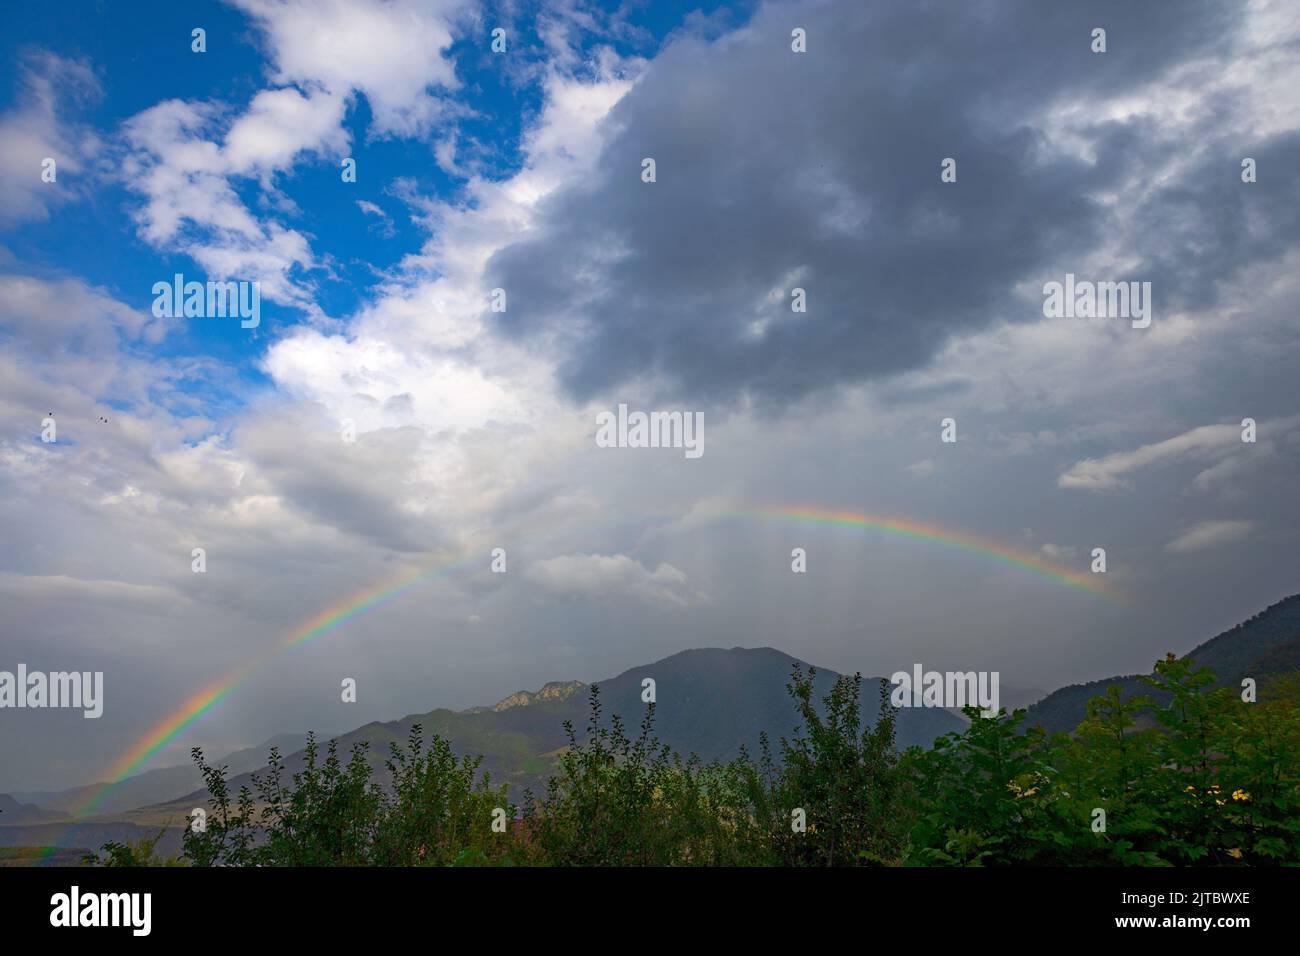 Full complete rainbow and sun rays on a cloudy and rainy day, with a green forest, mountains and a village in the background, in summer Stock Photo